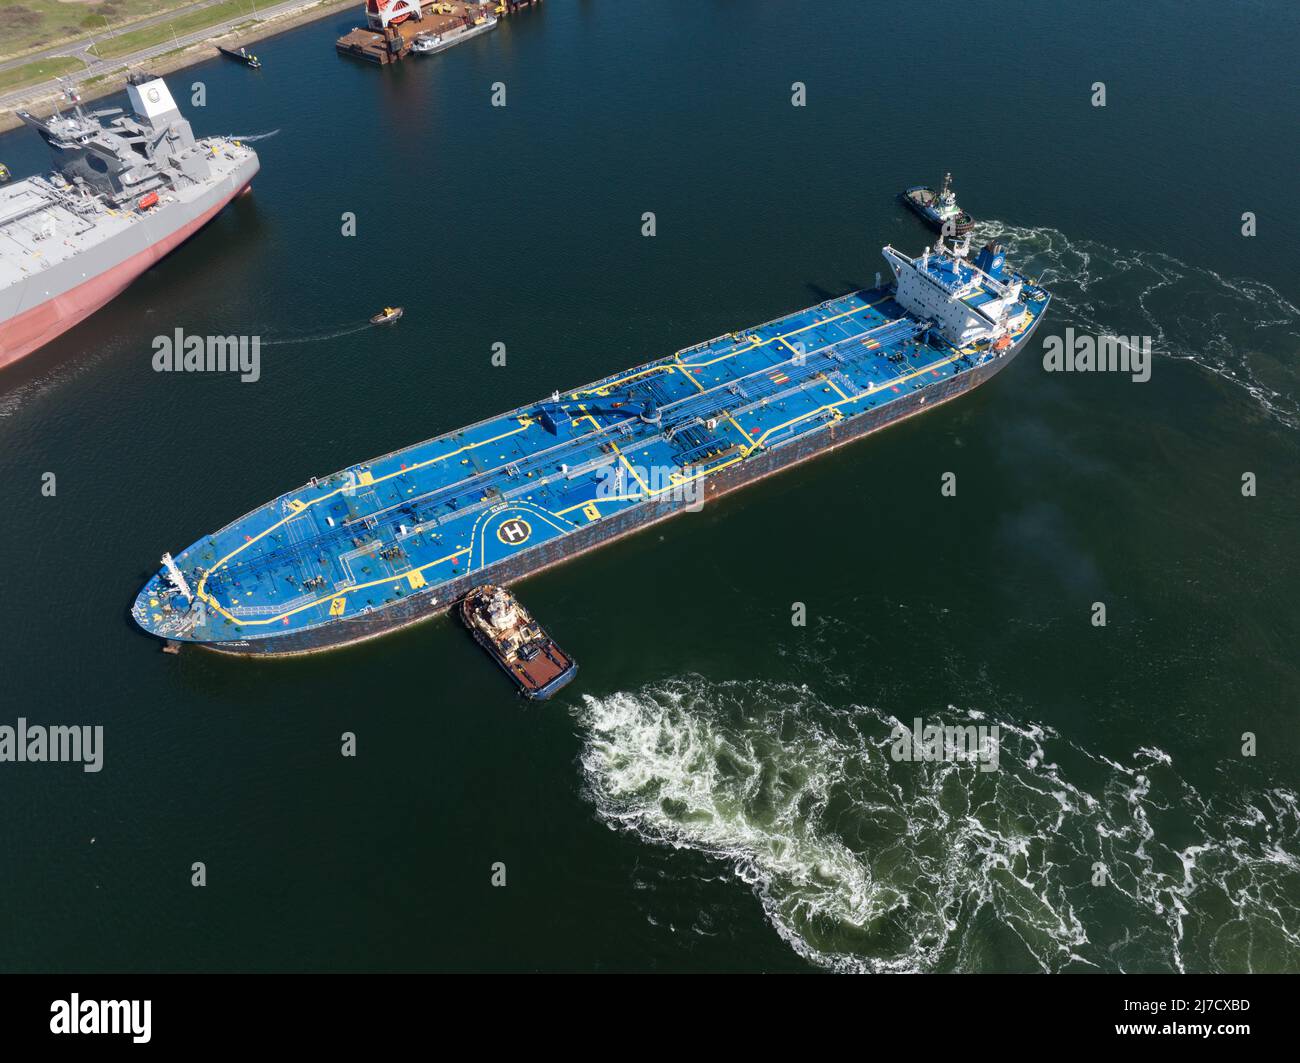 Rotterdam, 18th of april 2022, The Netherlands. Crude Oil Tanker ship Alhani being docked in the harbour by a tugboat marine vessel. Aerial drone view Stock Photo